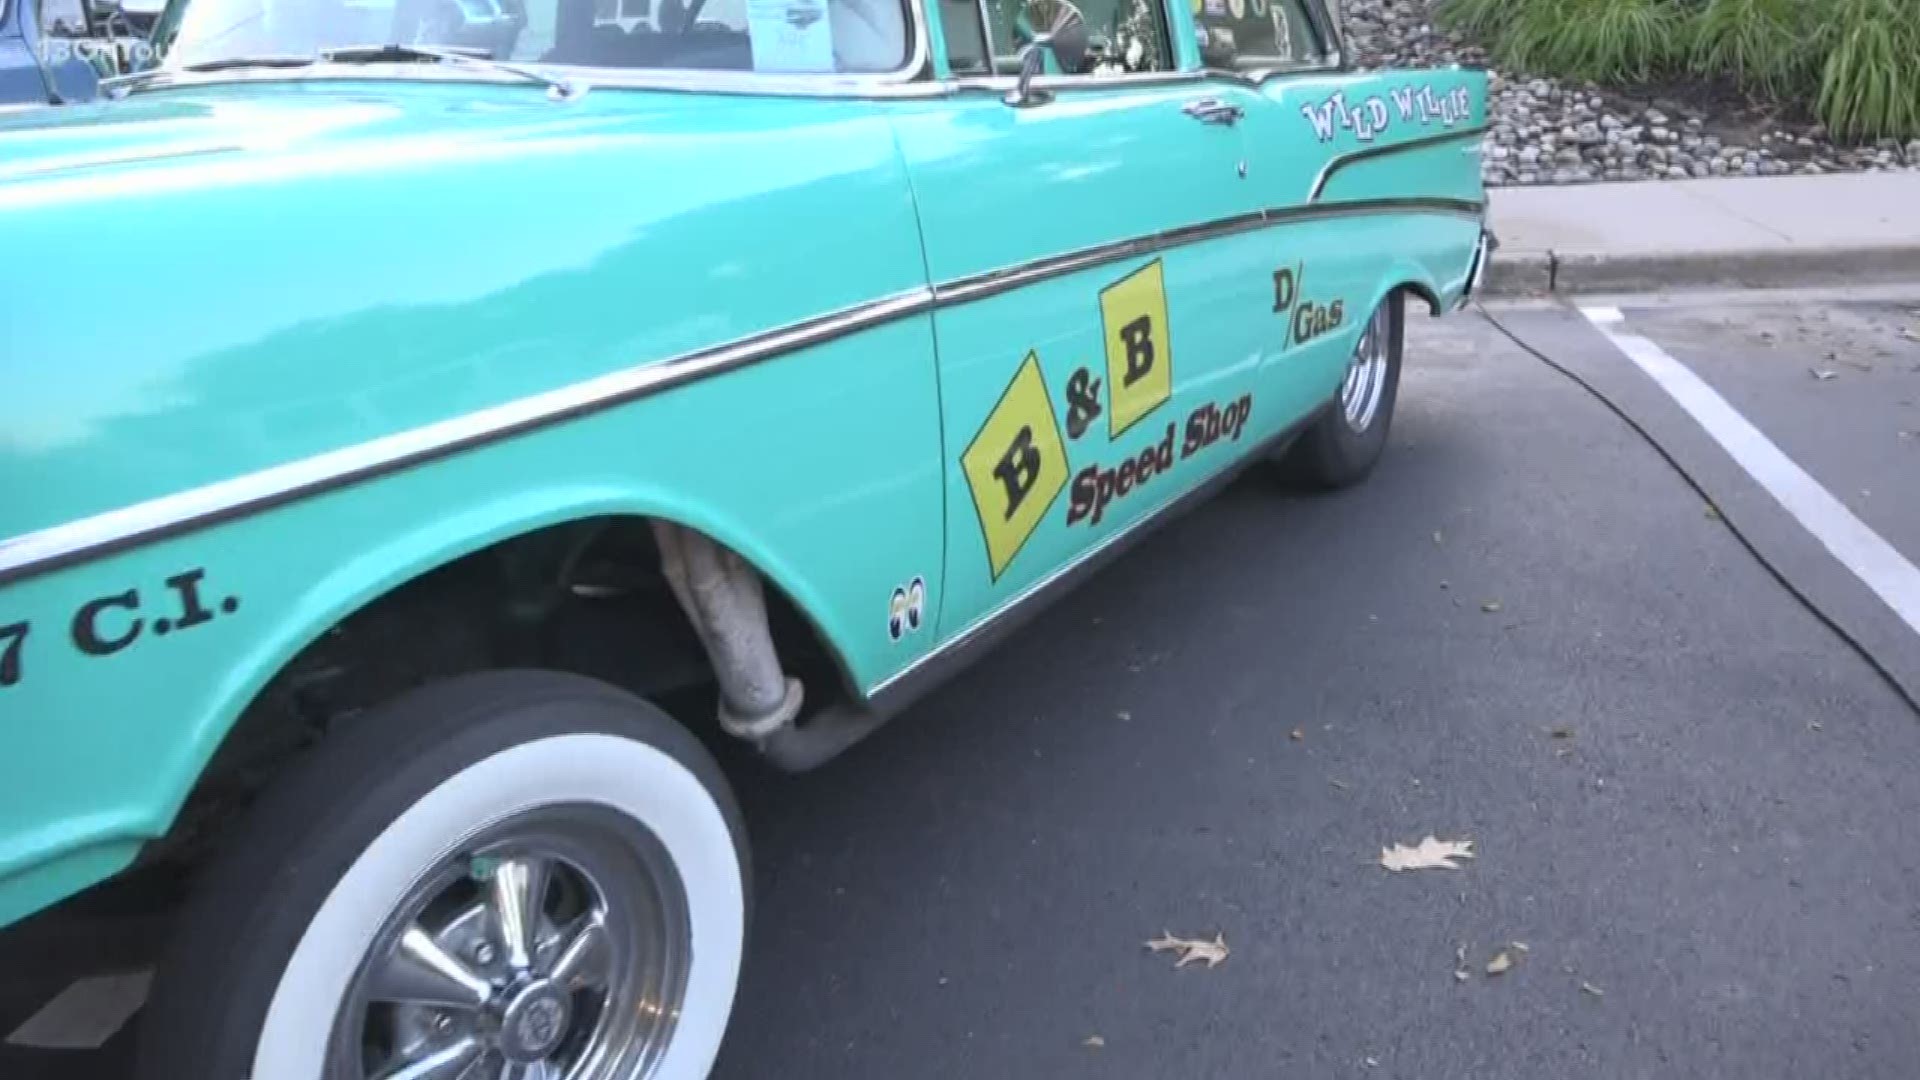 Roll on out to the 28th Street Metro Cruise in Wyoming this weekend. 13 ON YOUR SIDE's Kristin Mazur brings you all the details of the 15th annual event and what cool cars you can expect to see.